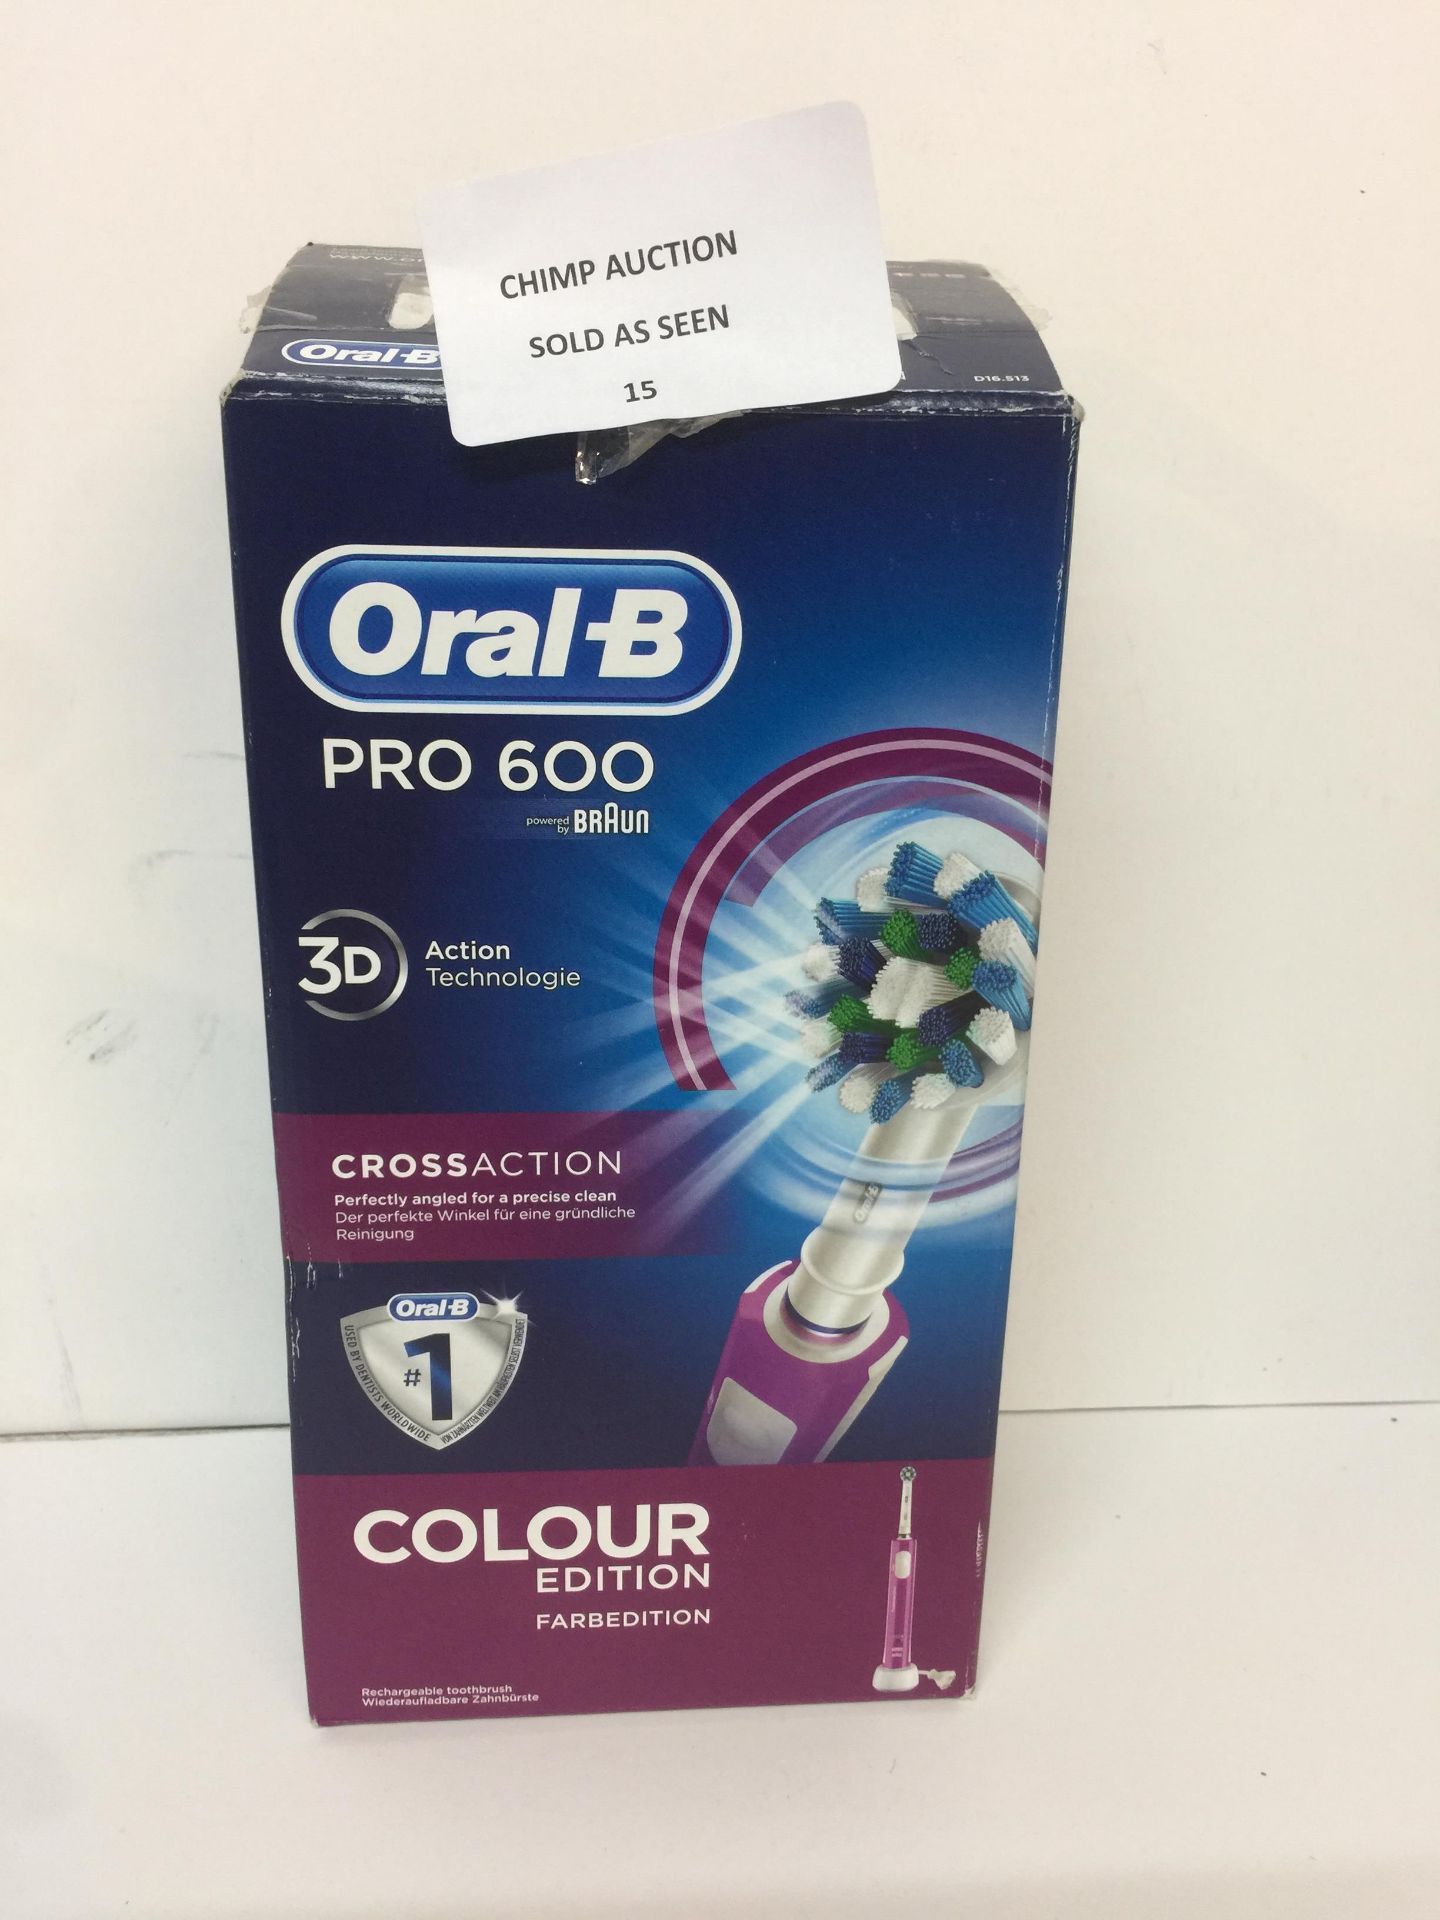 Oral-B Pro 600 CrossAction Electric Toothbrush RRP £49.99